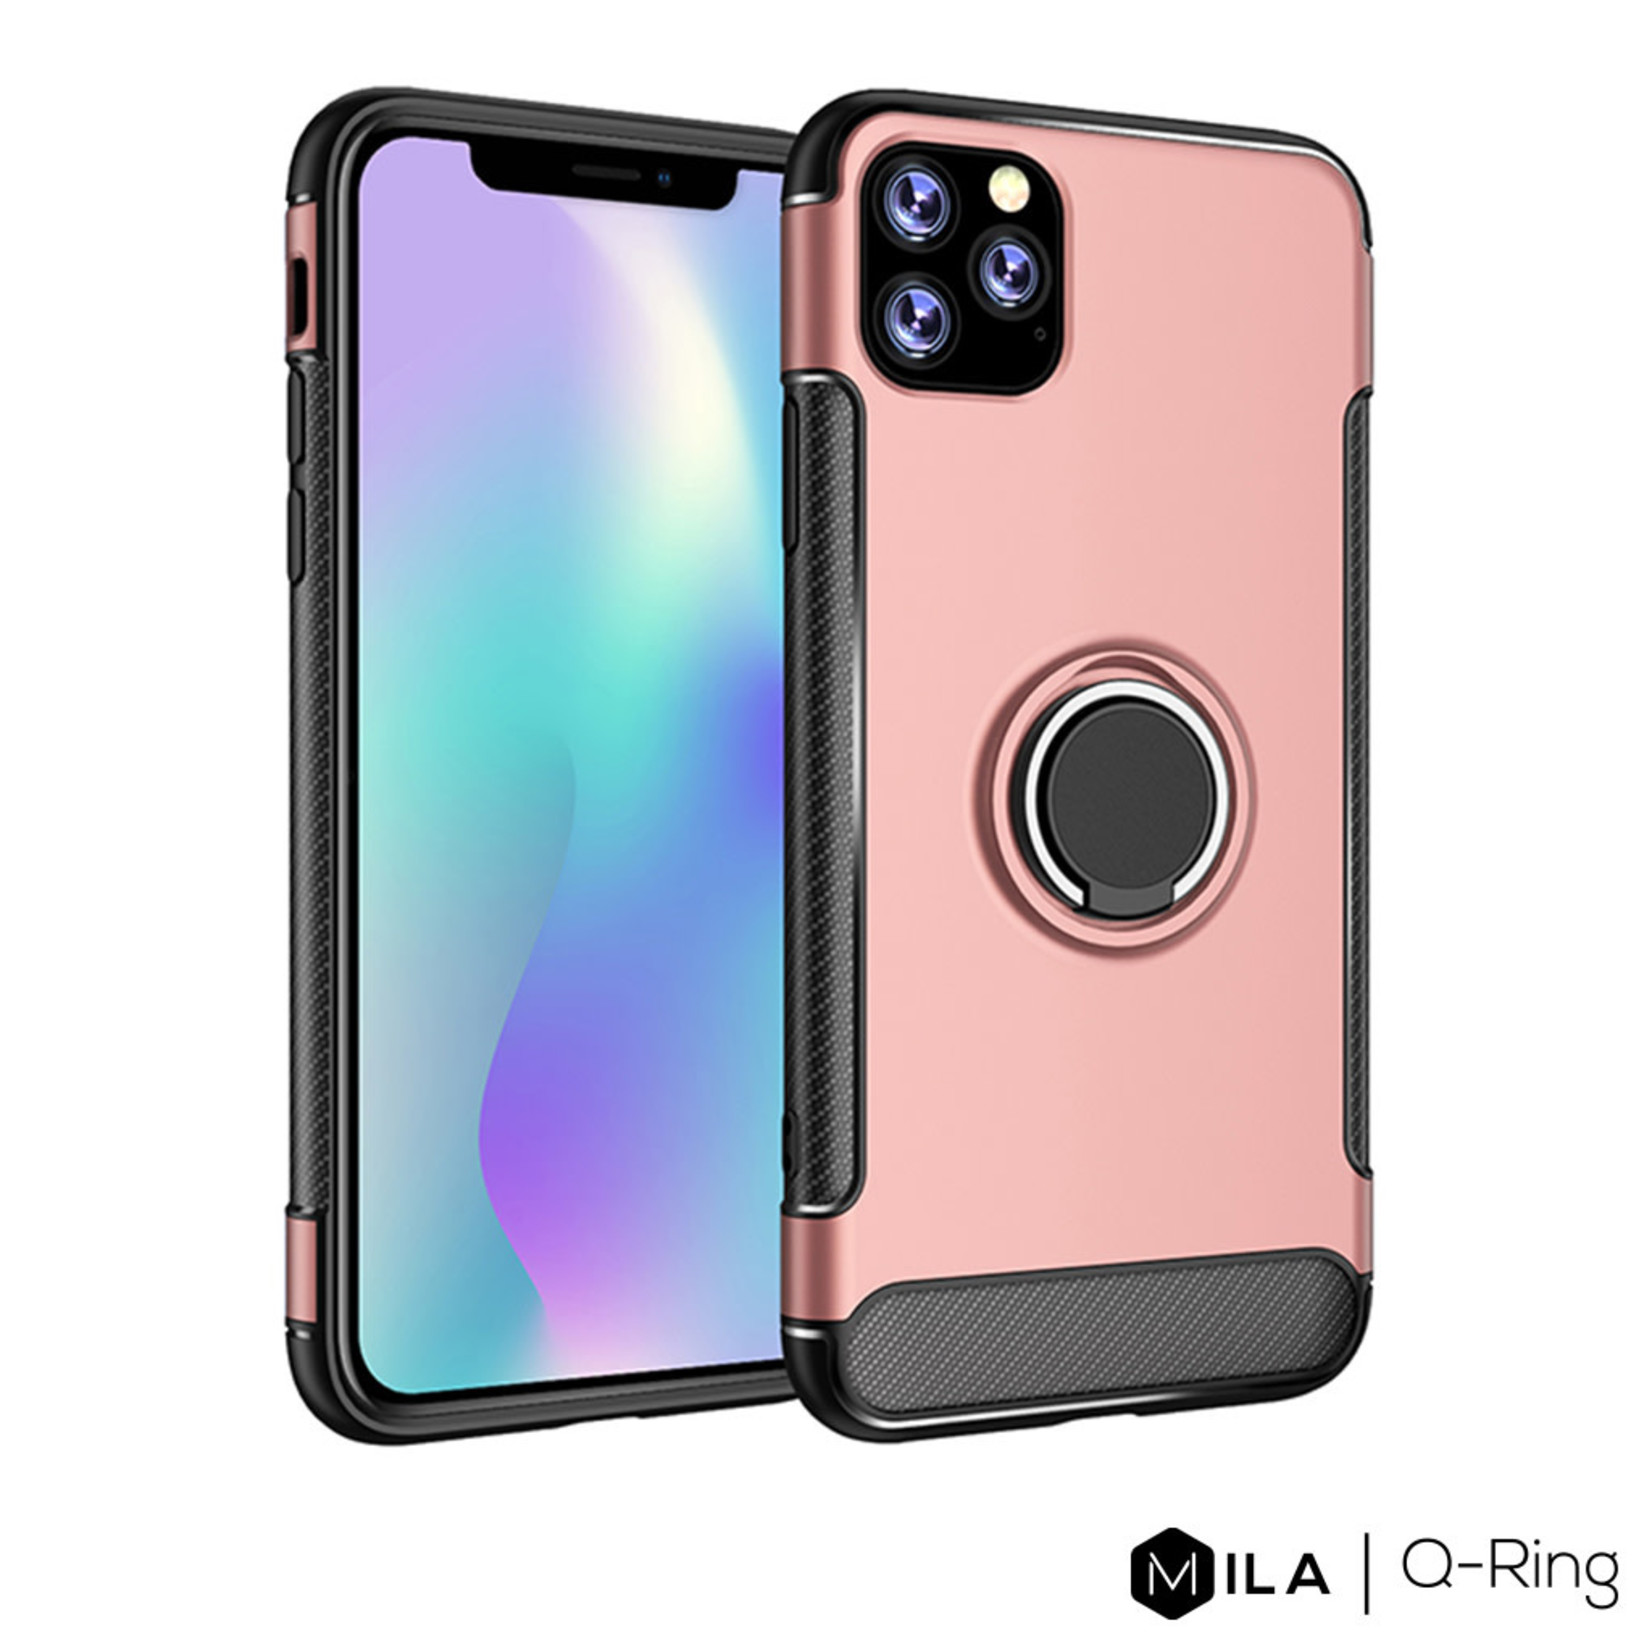 MILA | Q-Ring Case for iPhone 11 Pro